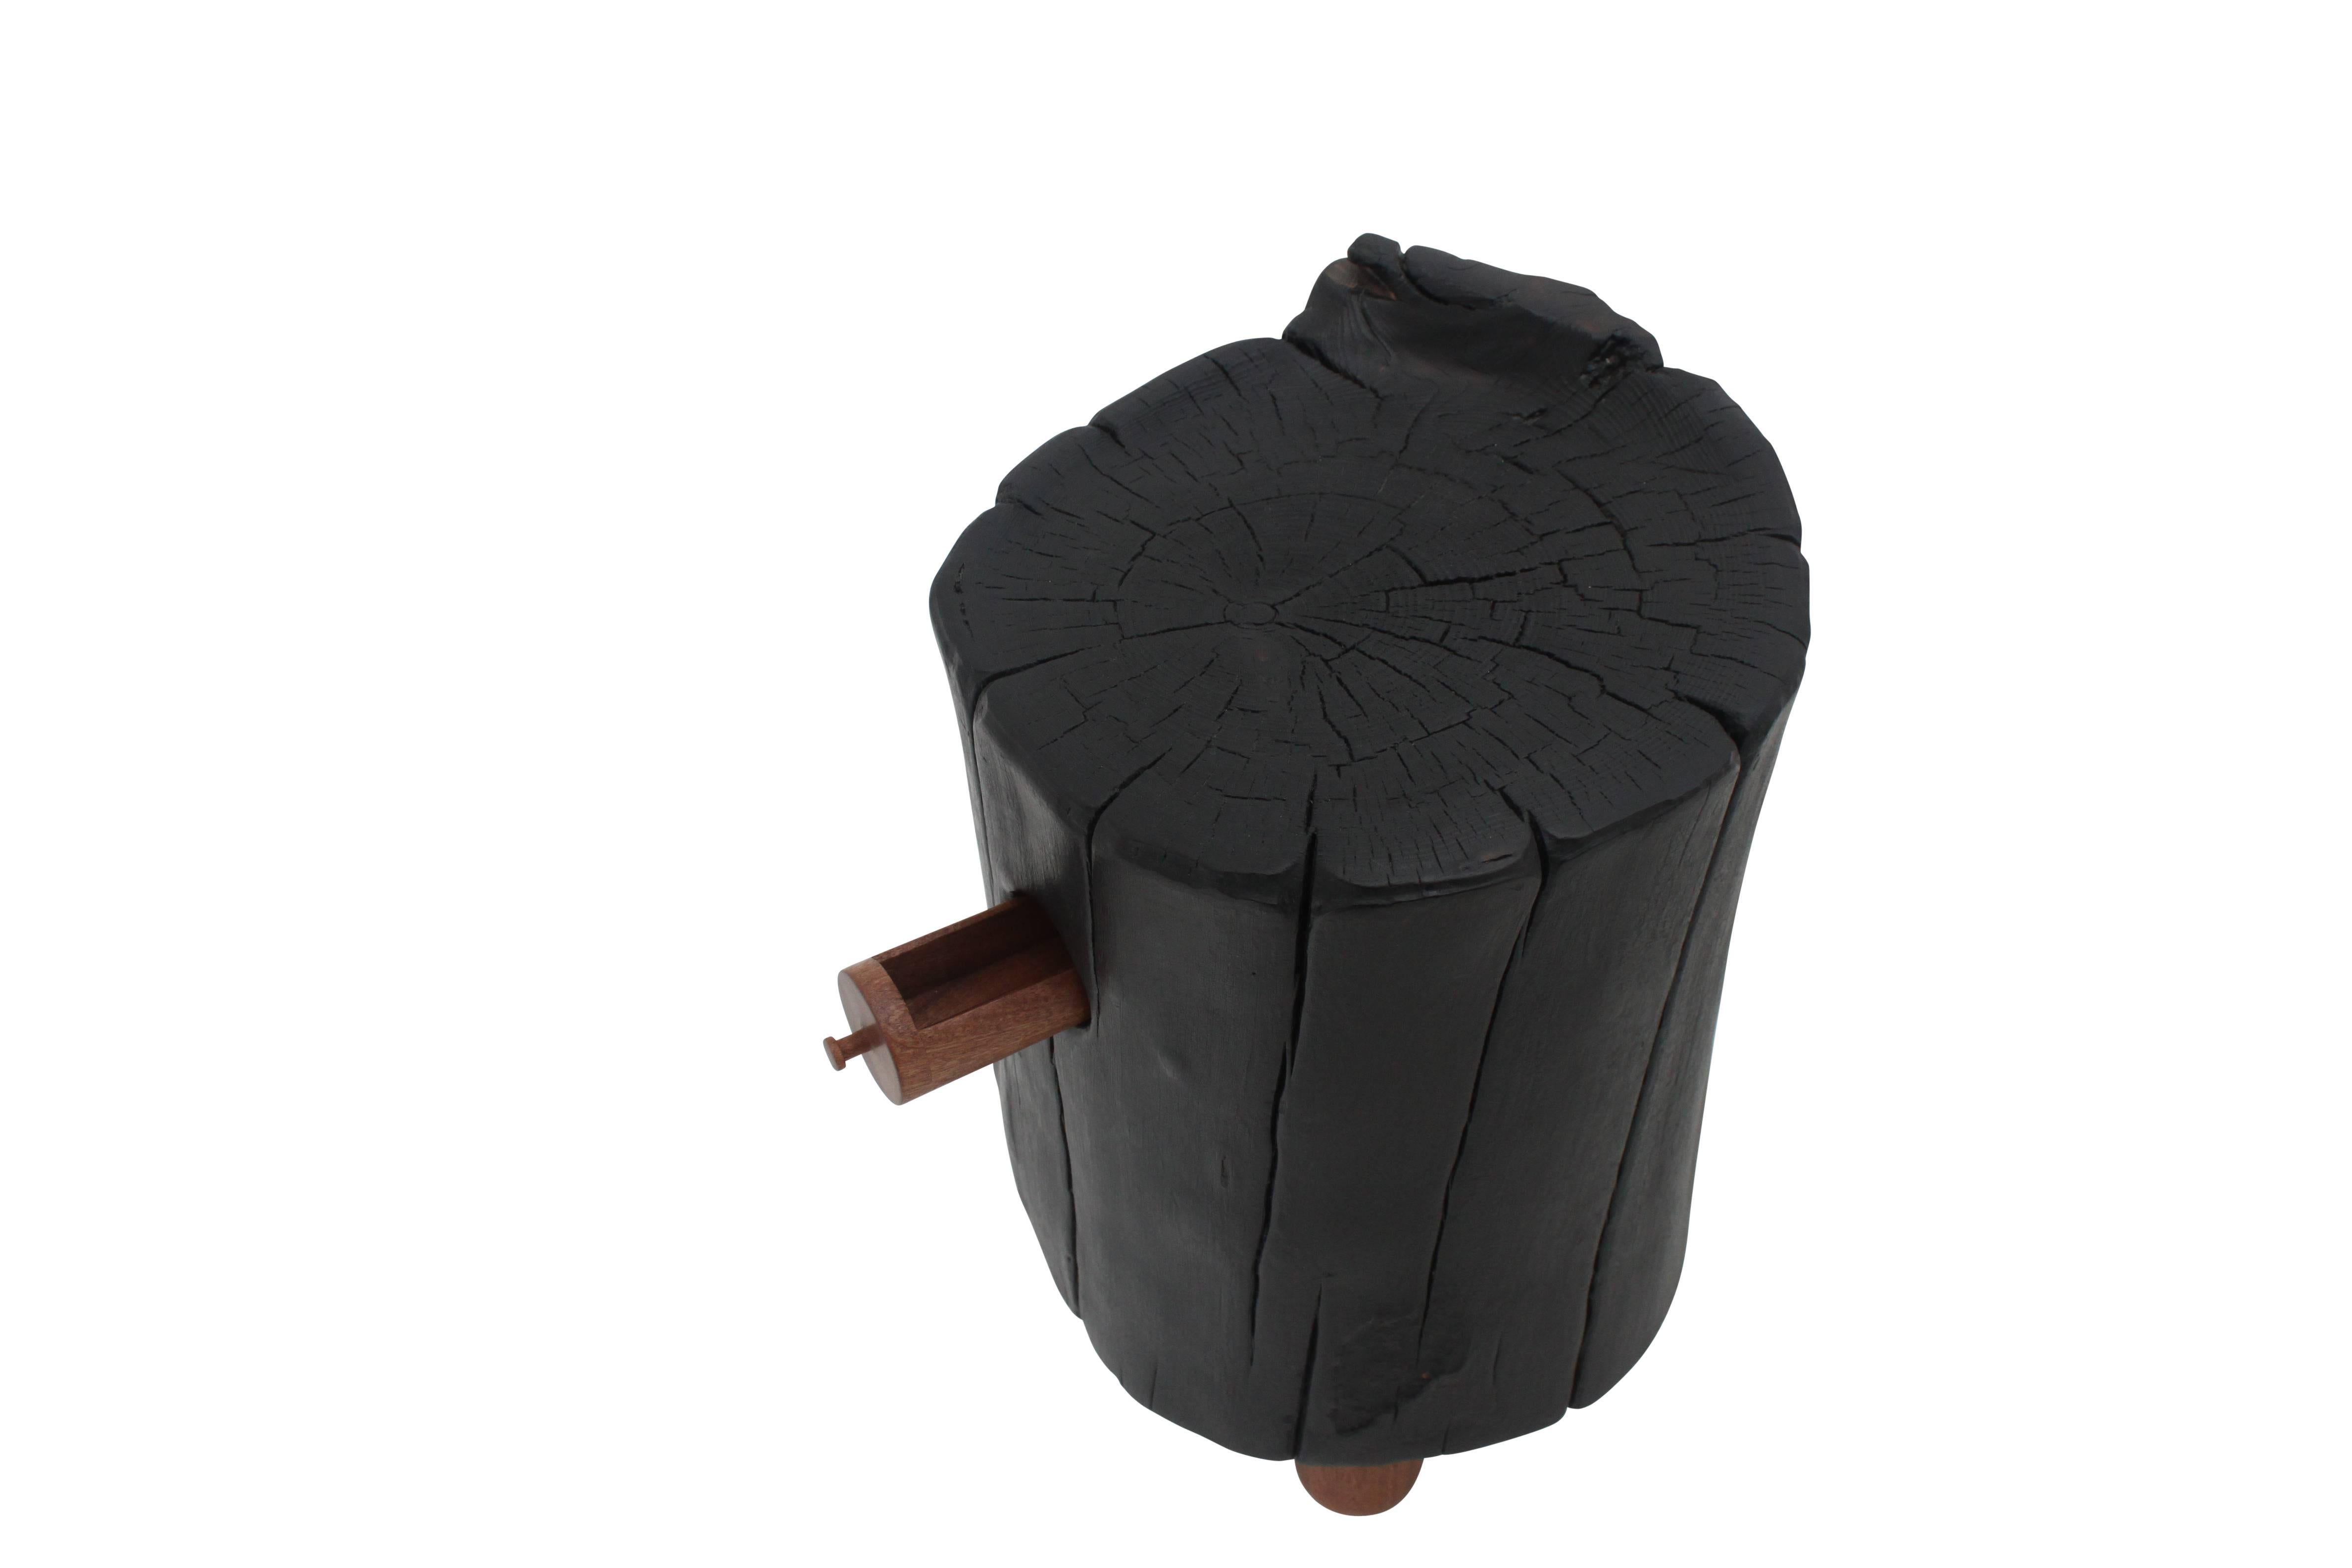 Charred Salvaged Hurricane Sandy Stump Stools with Hand-Turned Legs and Drawers 1